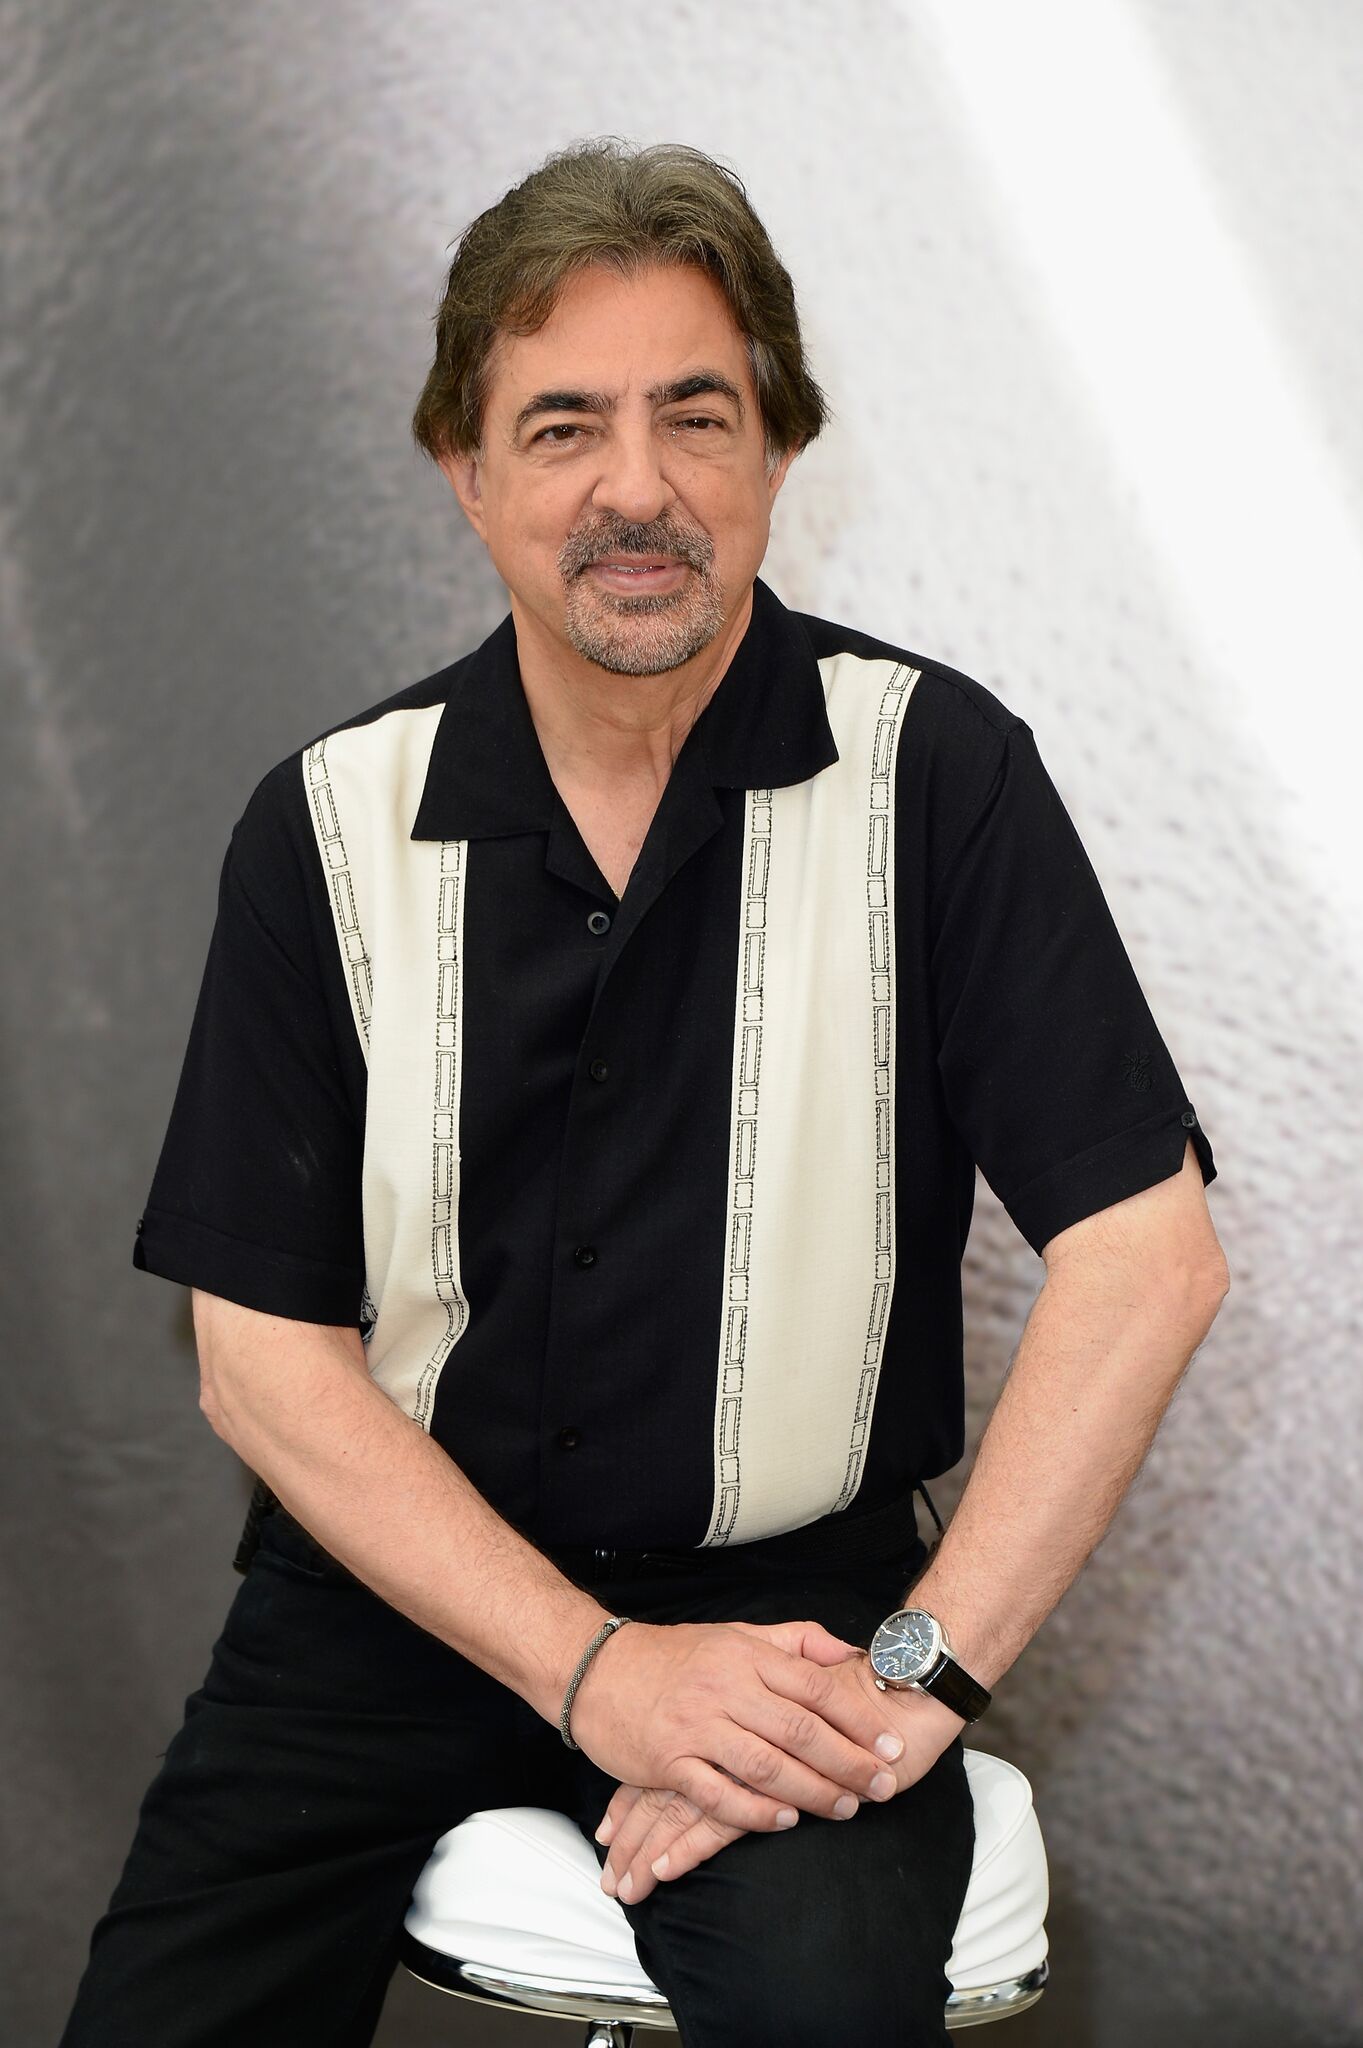 Joe Mantegna poses at a photocall during the 53rd Monte Carlo TV Festival | Getty Images